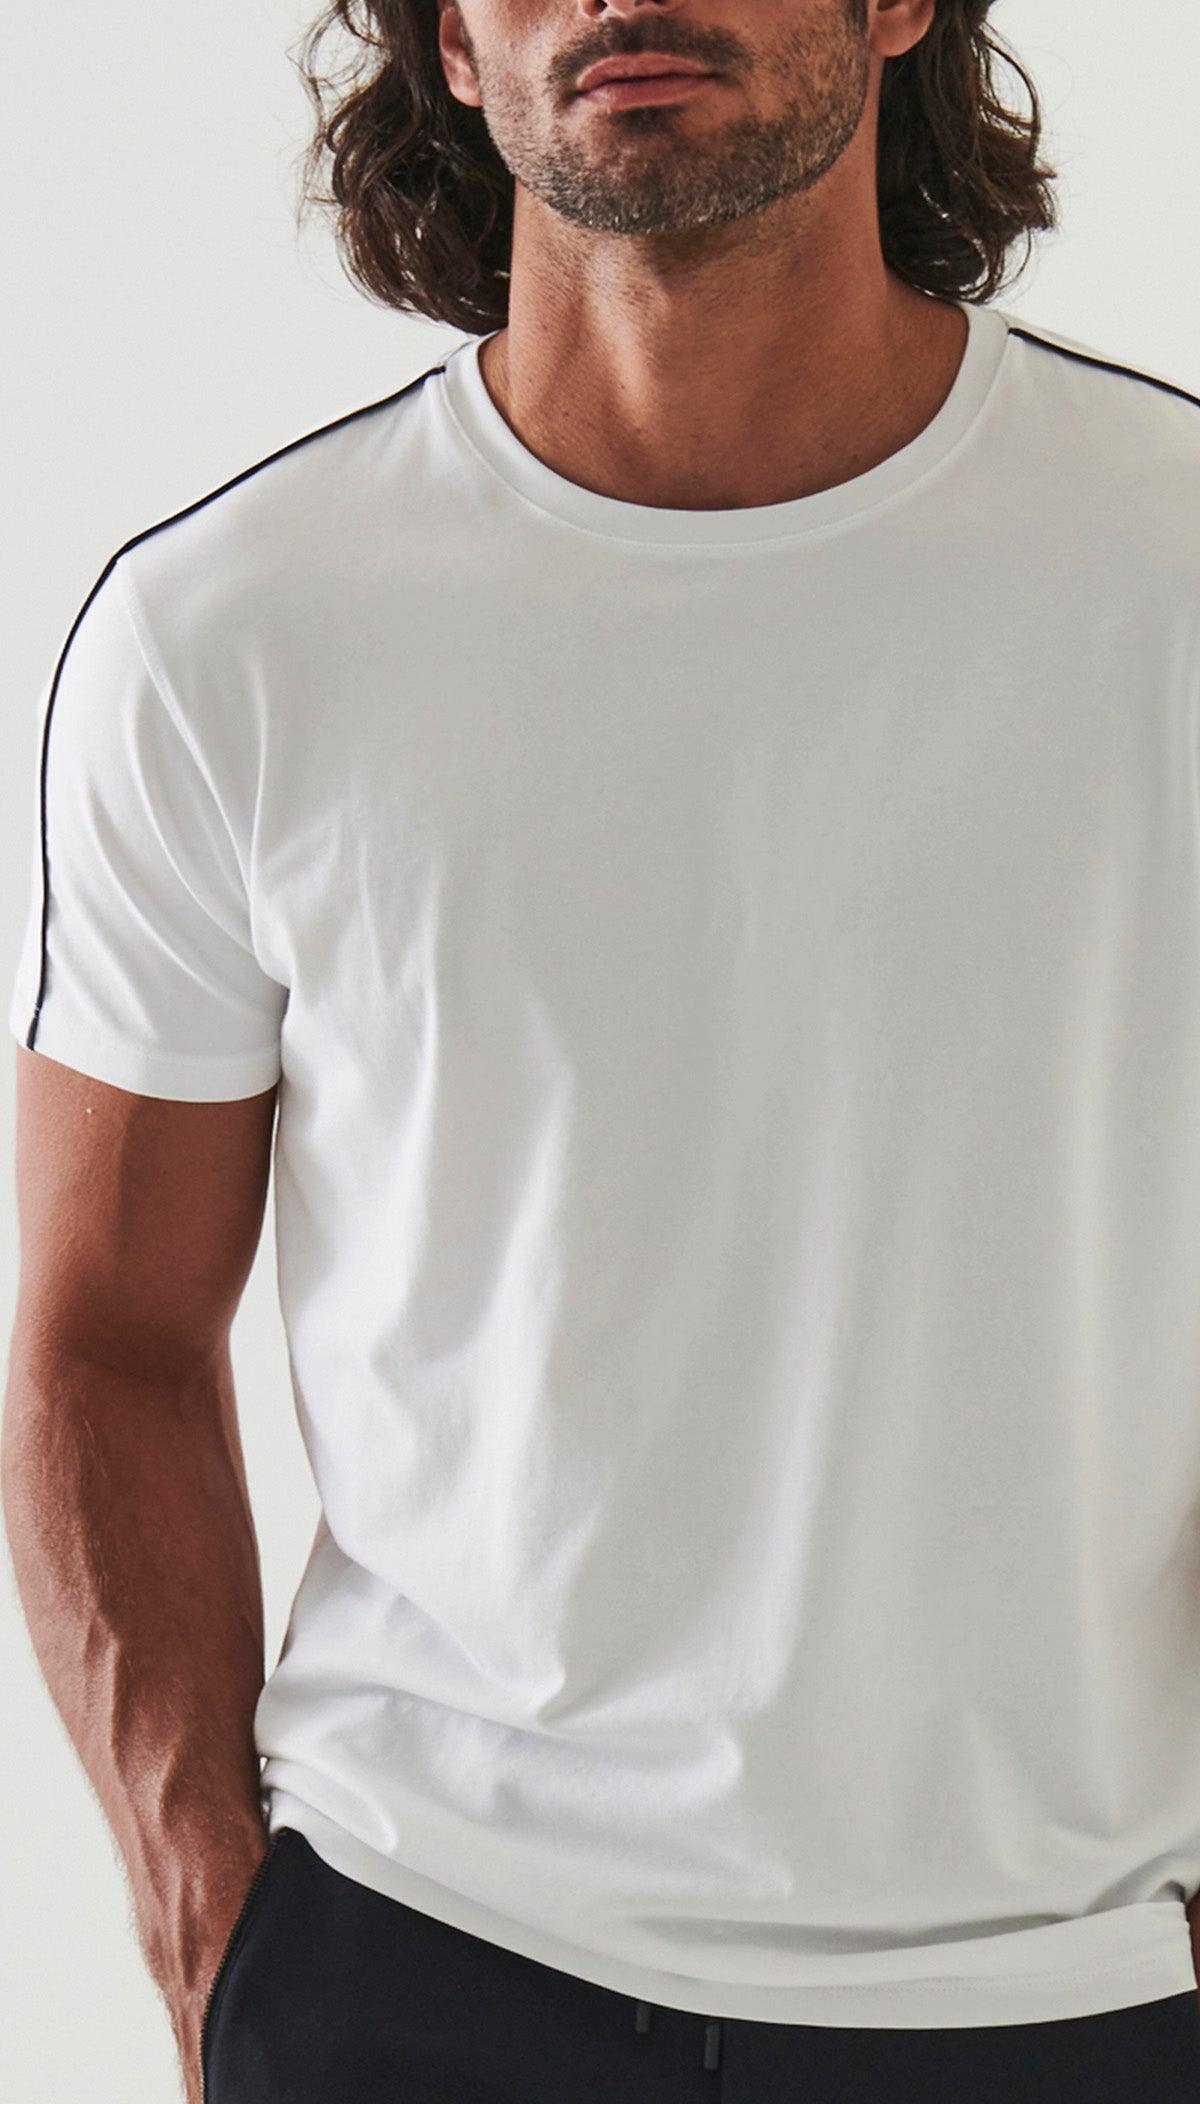 The ultimate in comfort and softness, this ultra soft pima cotton tee sports a fine contemporary style.  Crisp white with a raised black accent along the shoulders and down the sleeve. Soft pima cotton. Designed by Assaraf Italy. Classic tee shirt model Open sleeves and bottom. Modern fit, perfect for a slim to medium build.